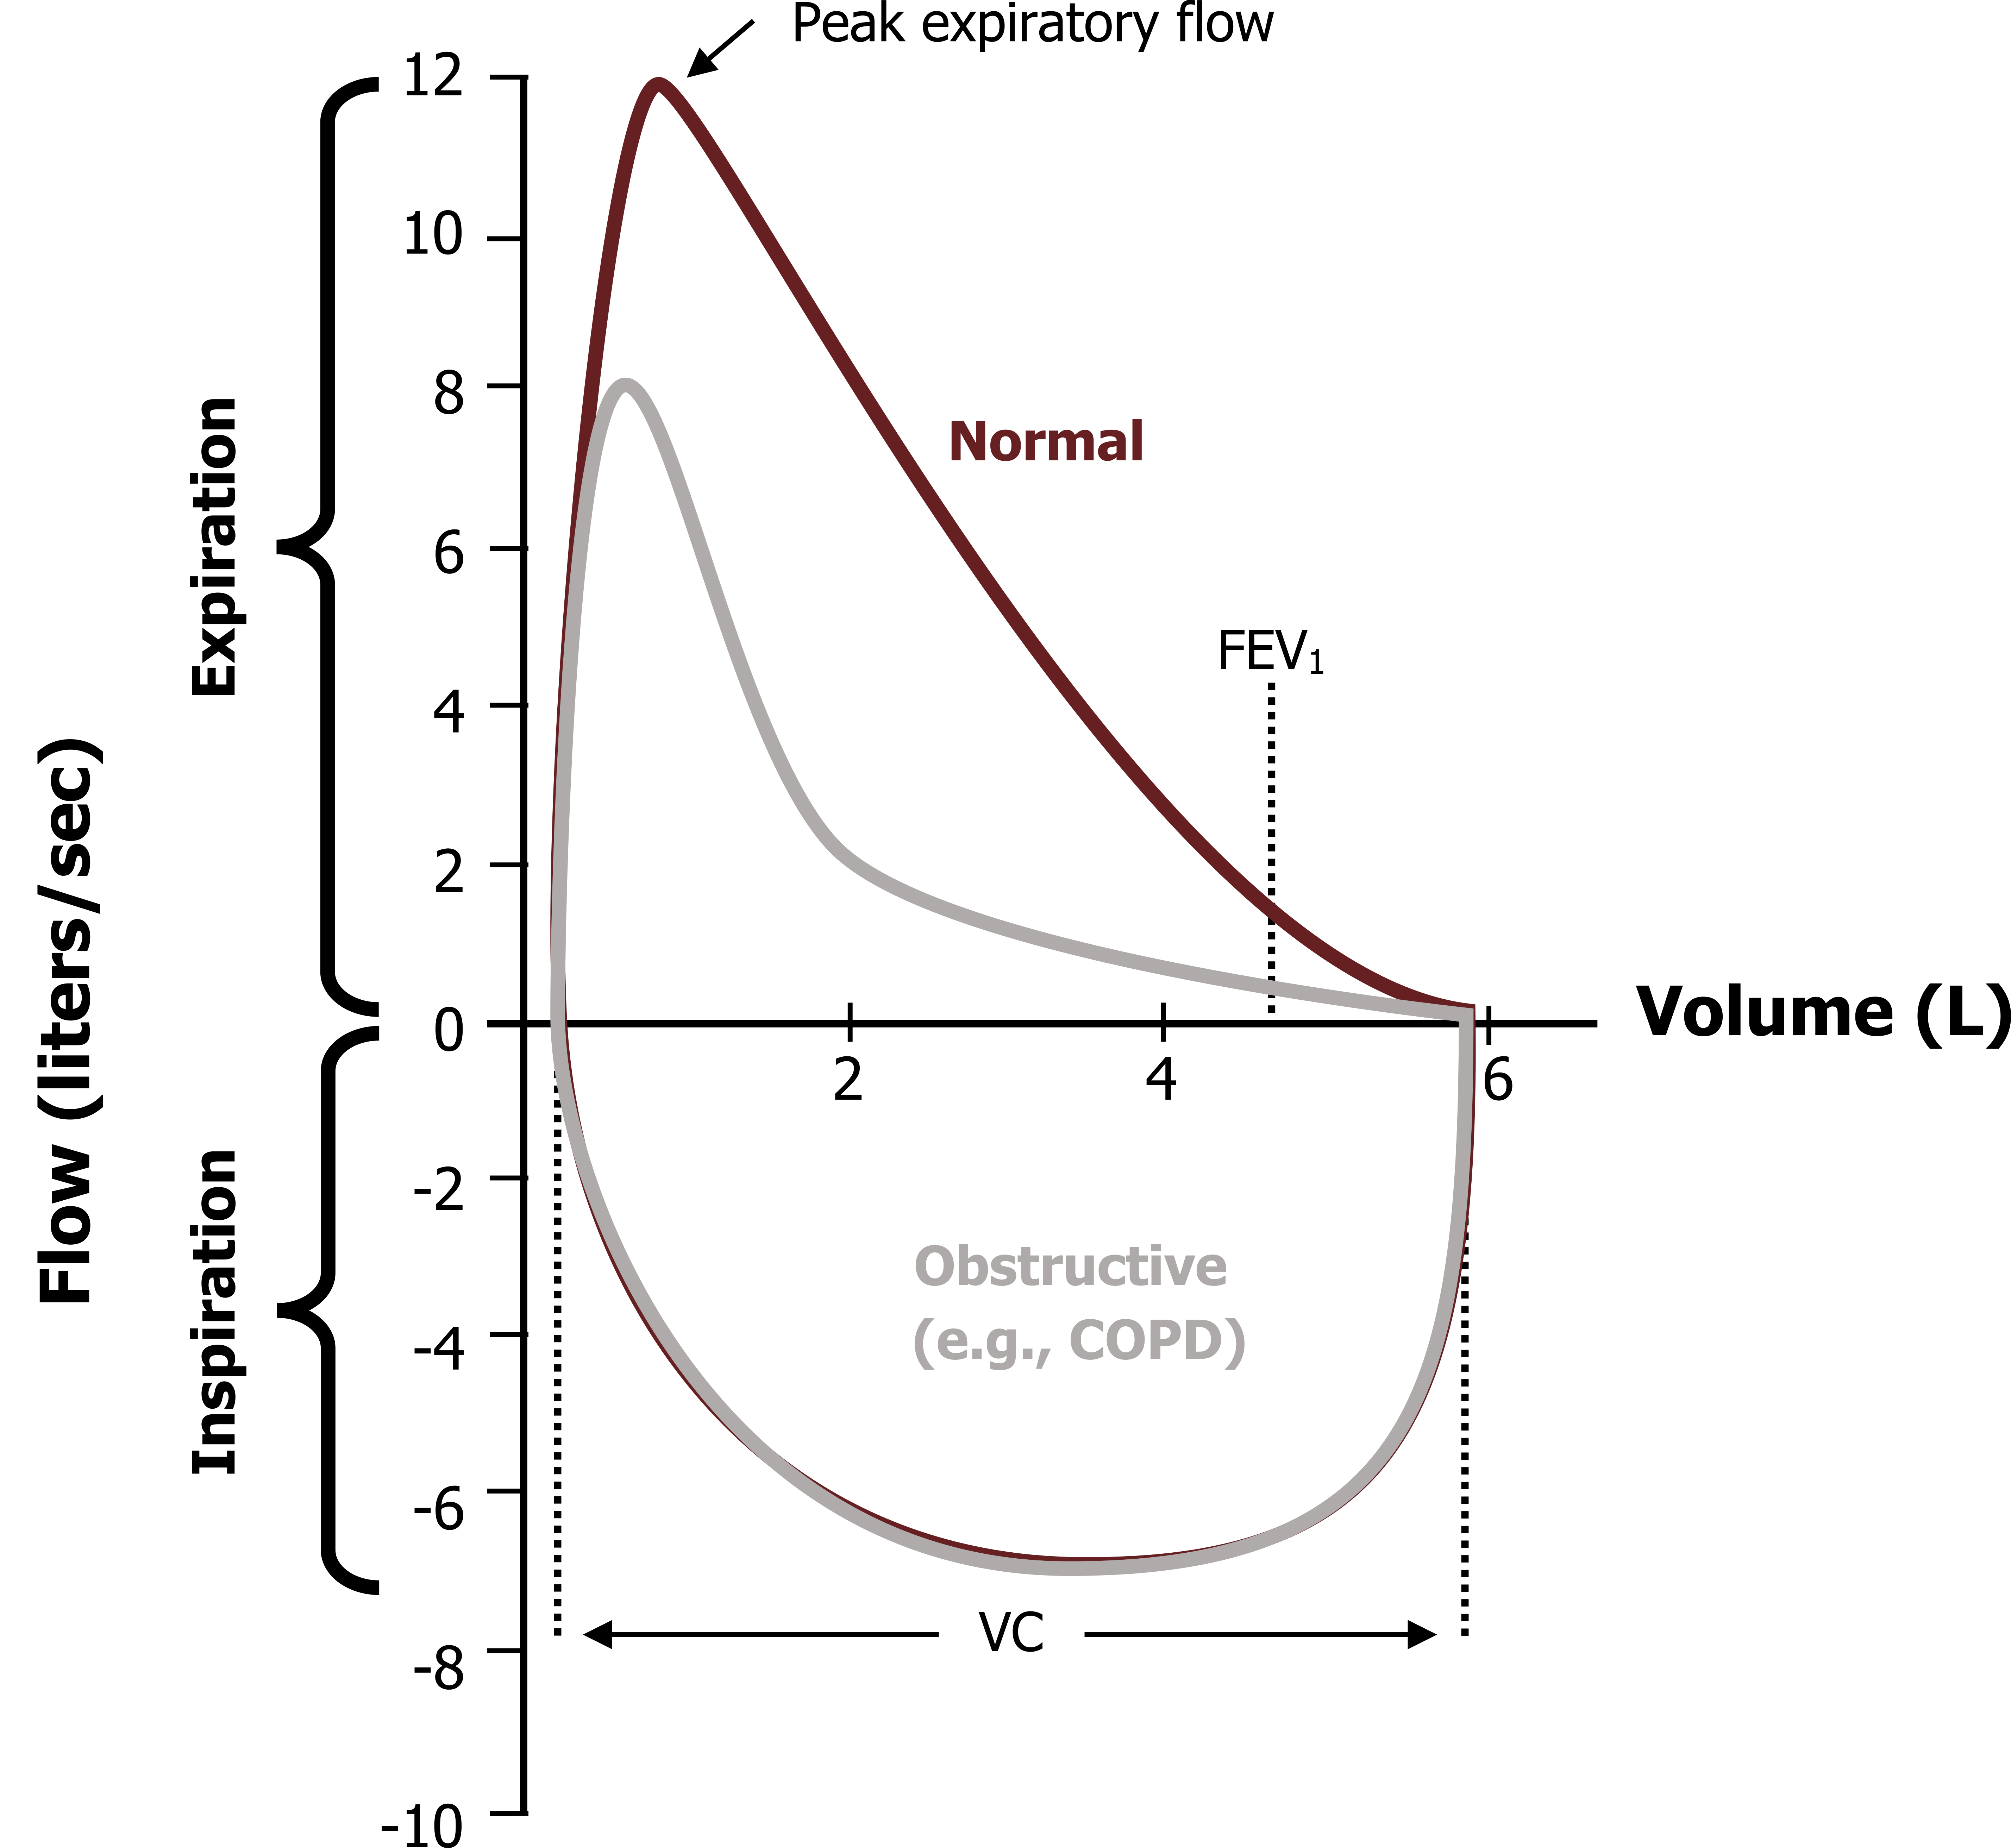 The same graph as described in figure 6.3 with an additional line labeled obstructive (e.g. COPD) which follows the same path but with a peak expiratory flow of 8 liters/second. All values are approximate.